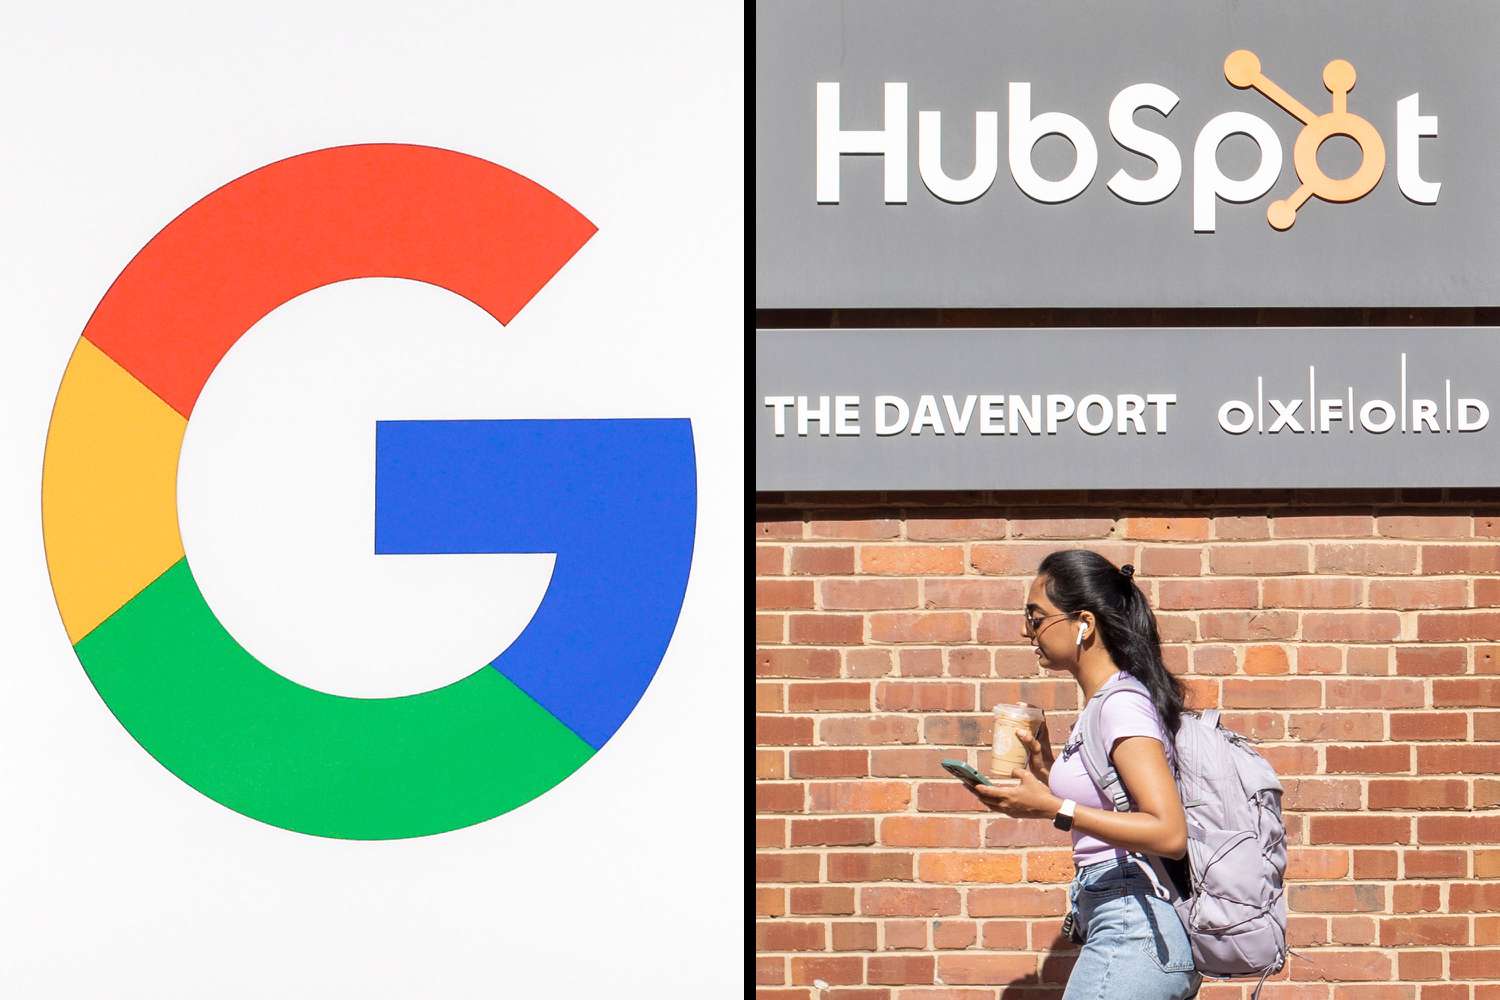 Google Parent Alphabet Reportedly Advancing Talks To Buy HubSpot as Earnings Top Estimates [Video]